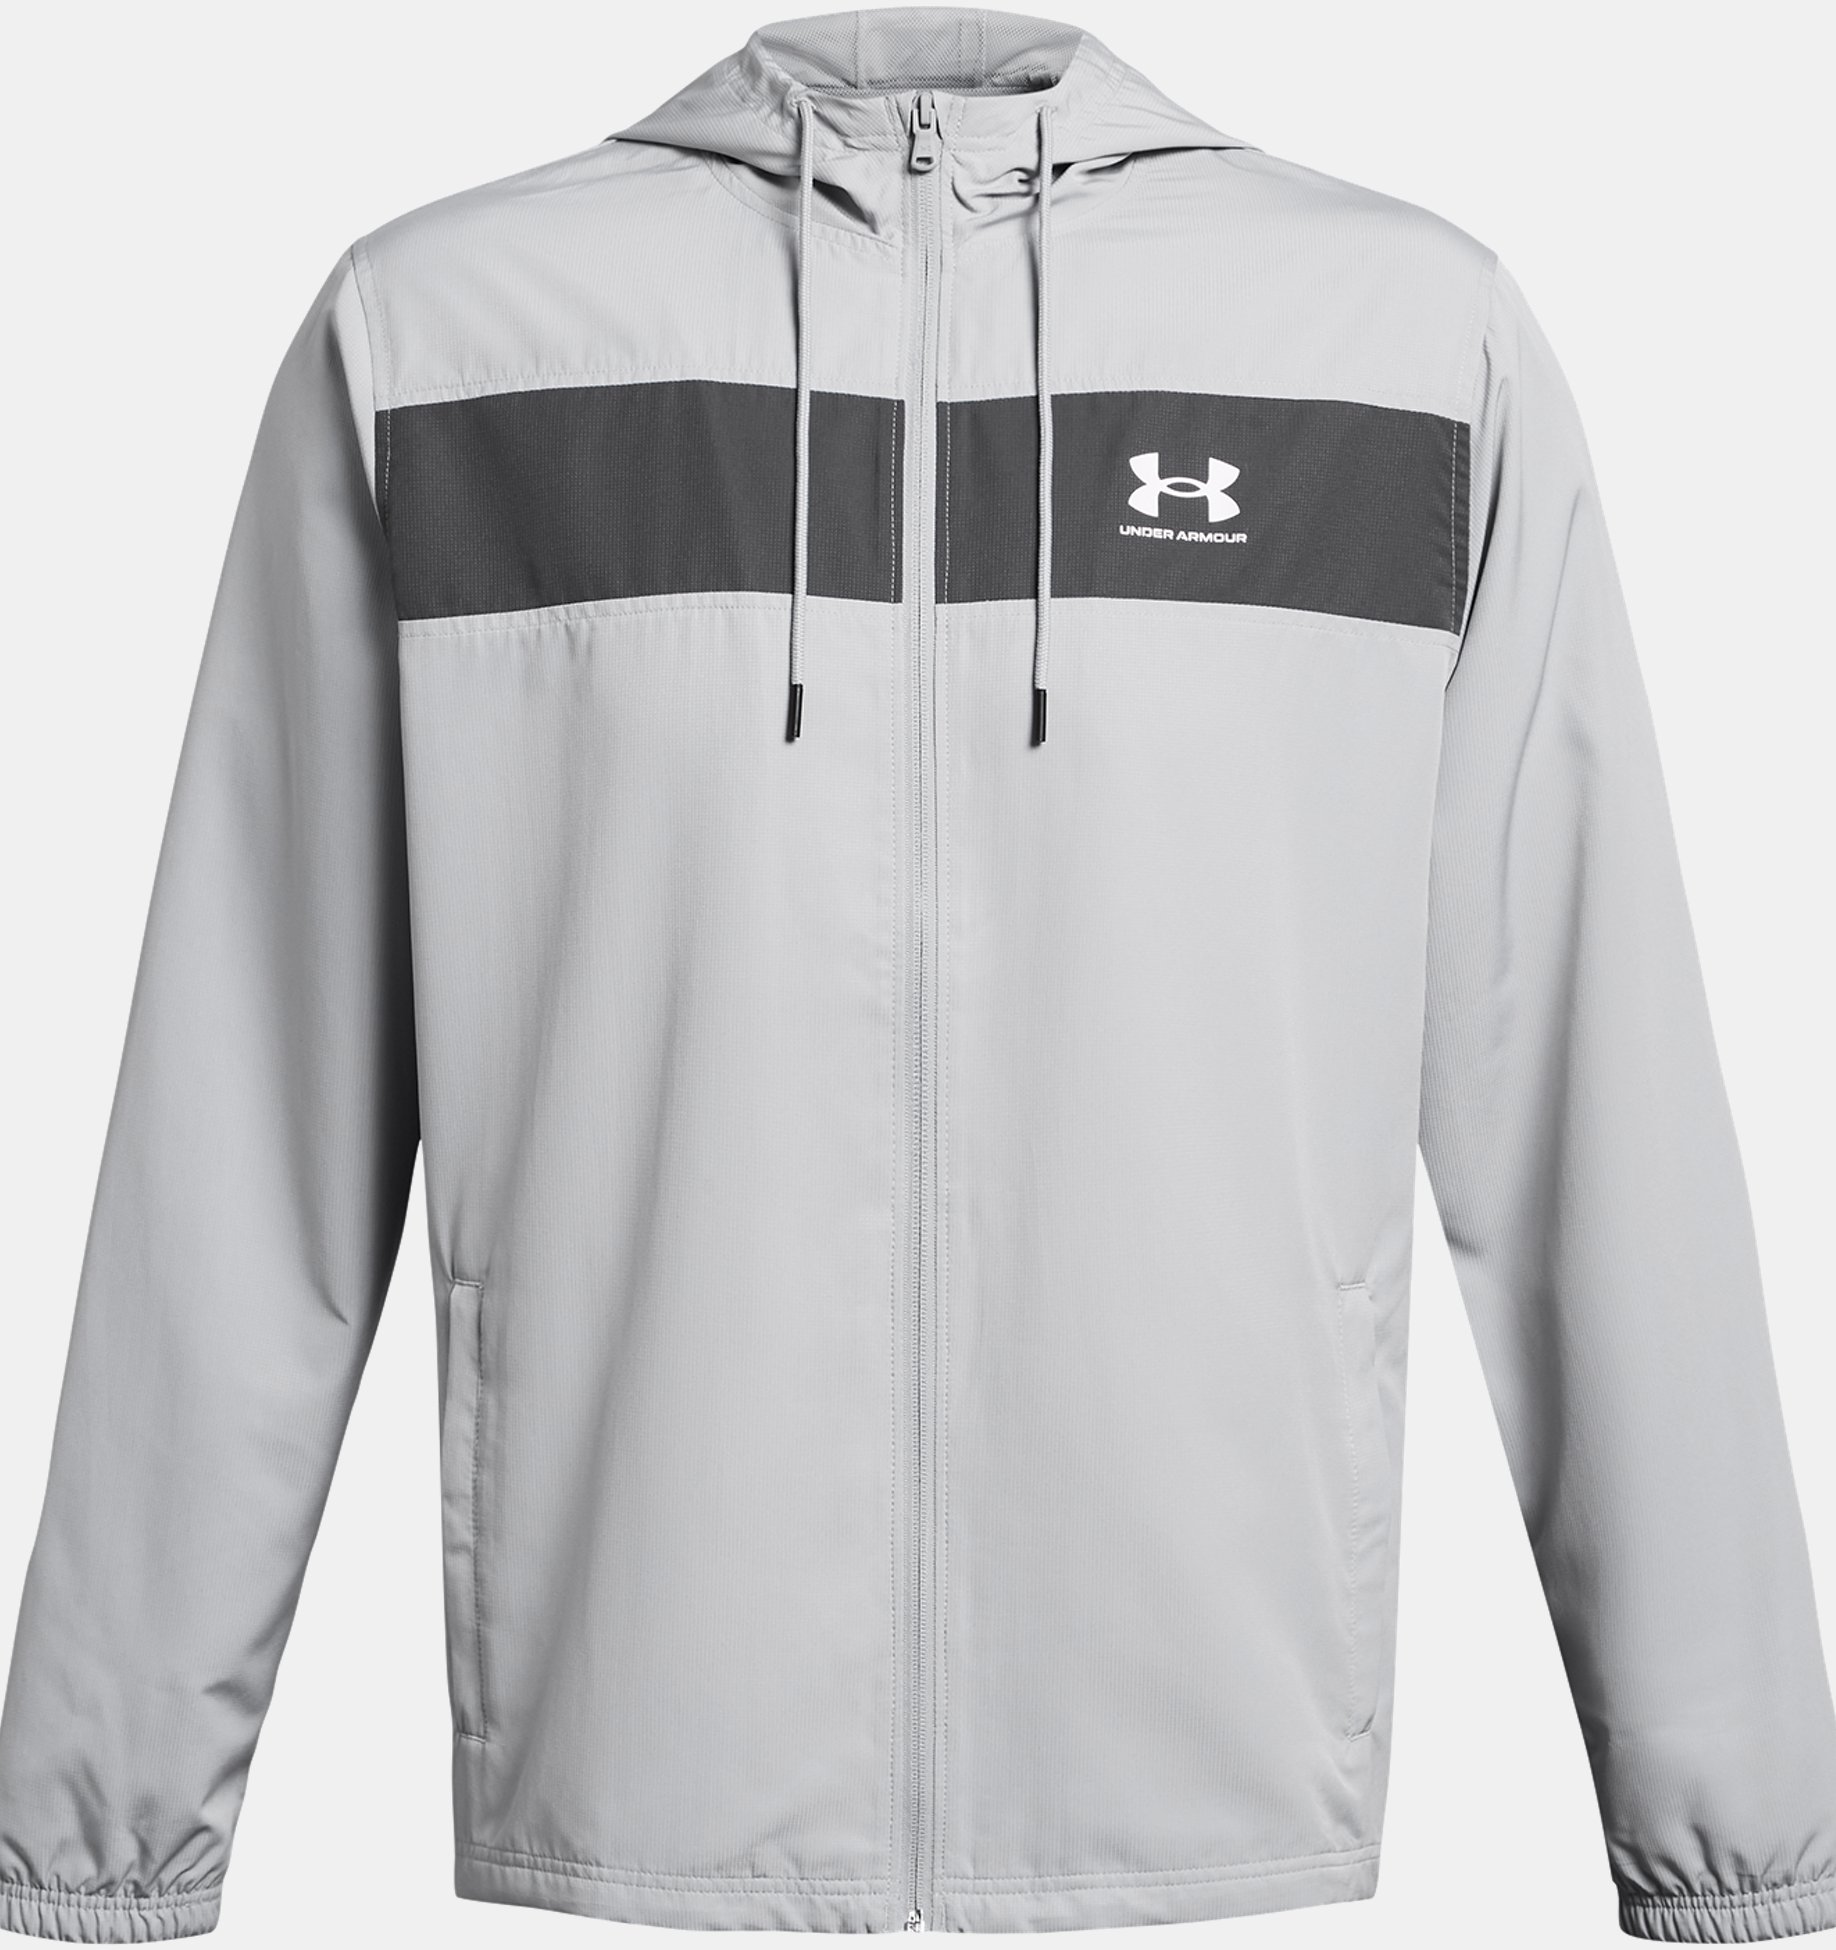 Under Armour windbreaker jacket in black and gray